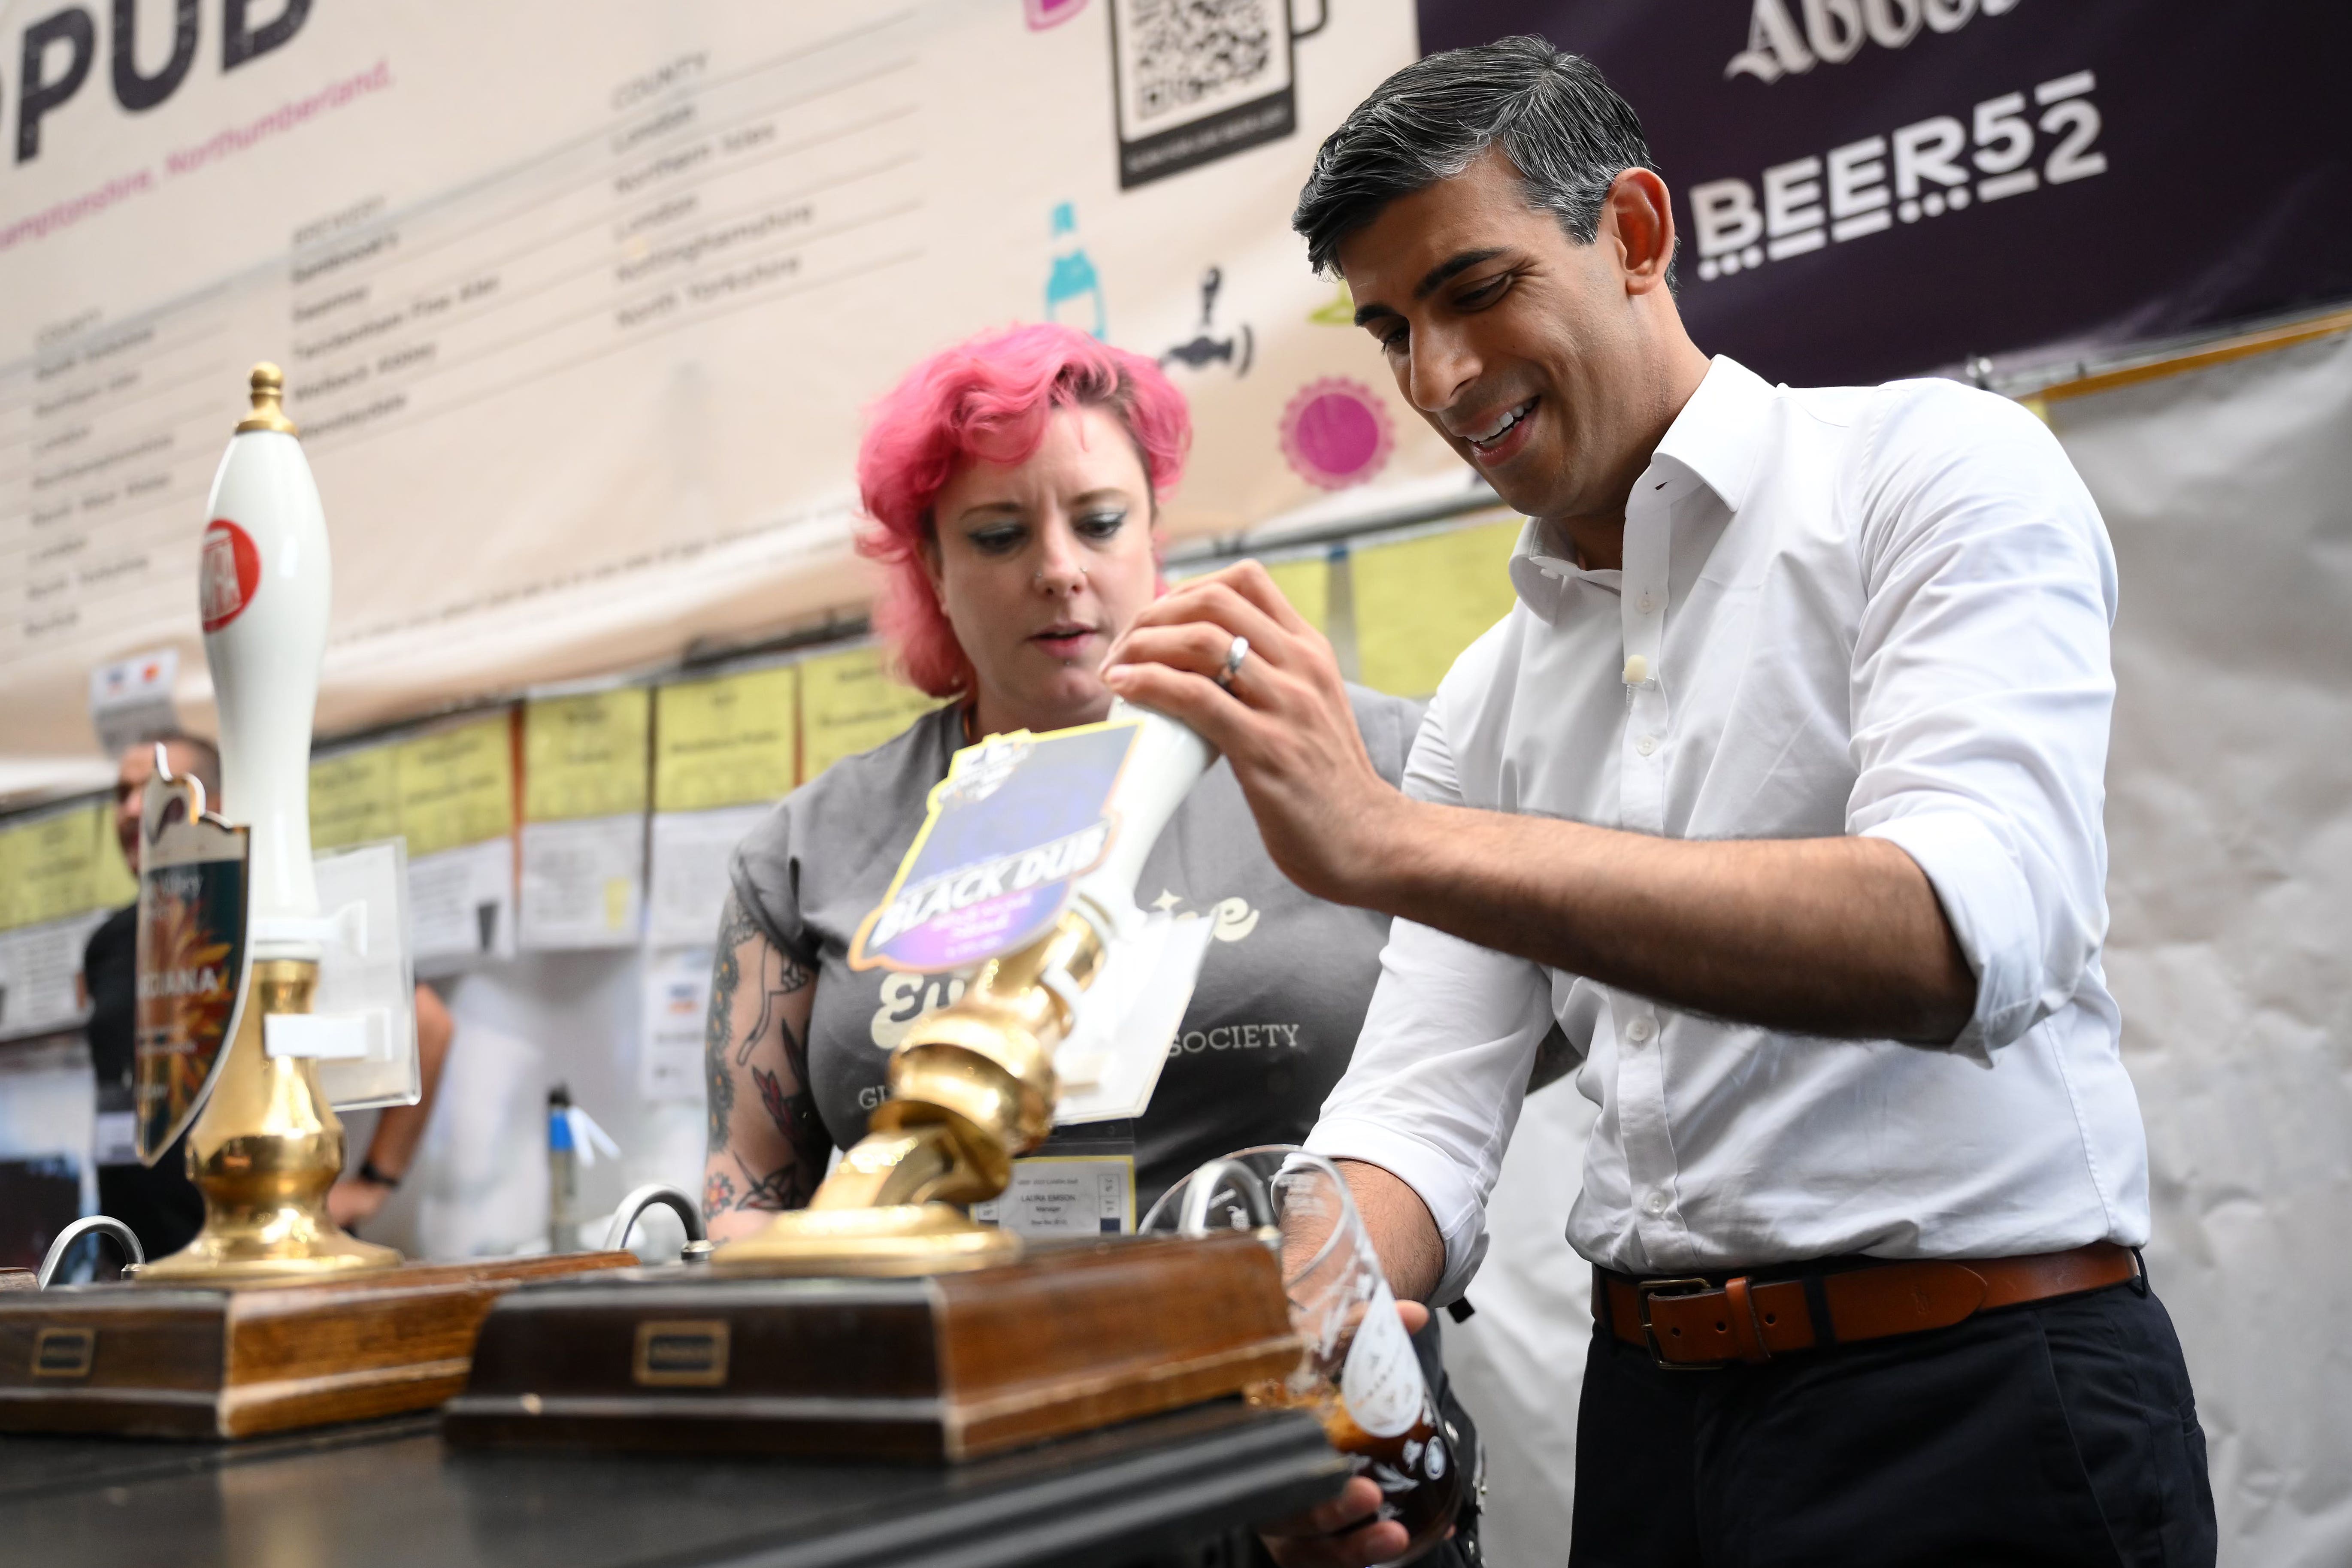 Prime Minister Rishi Sunak was heckled over the alcohol duty changes while visiting the Great British Beer Festival at Olympia, in London (Daniel Leal/PA)